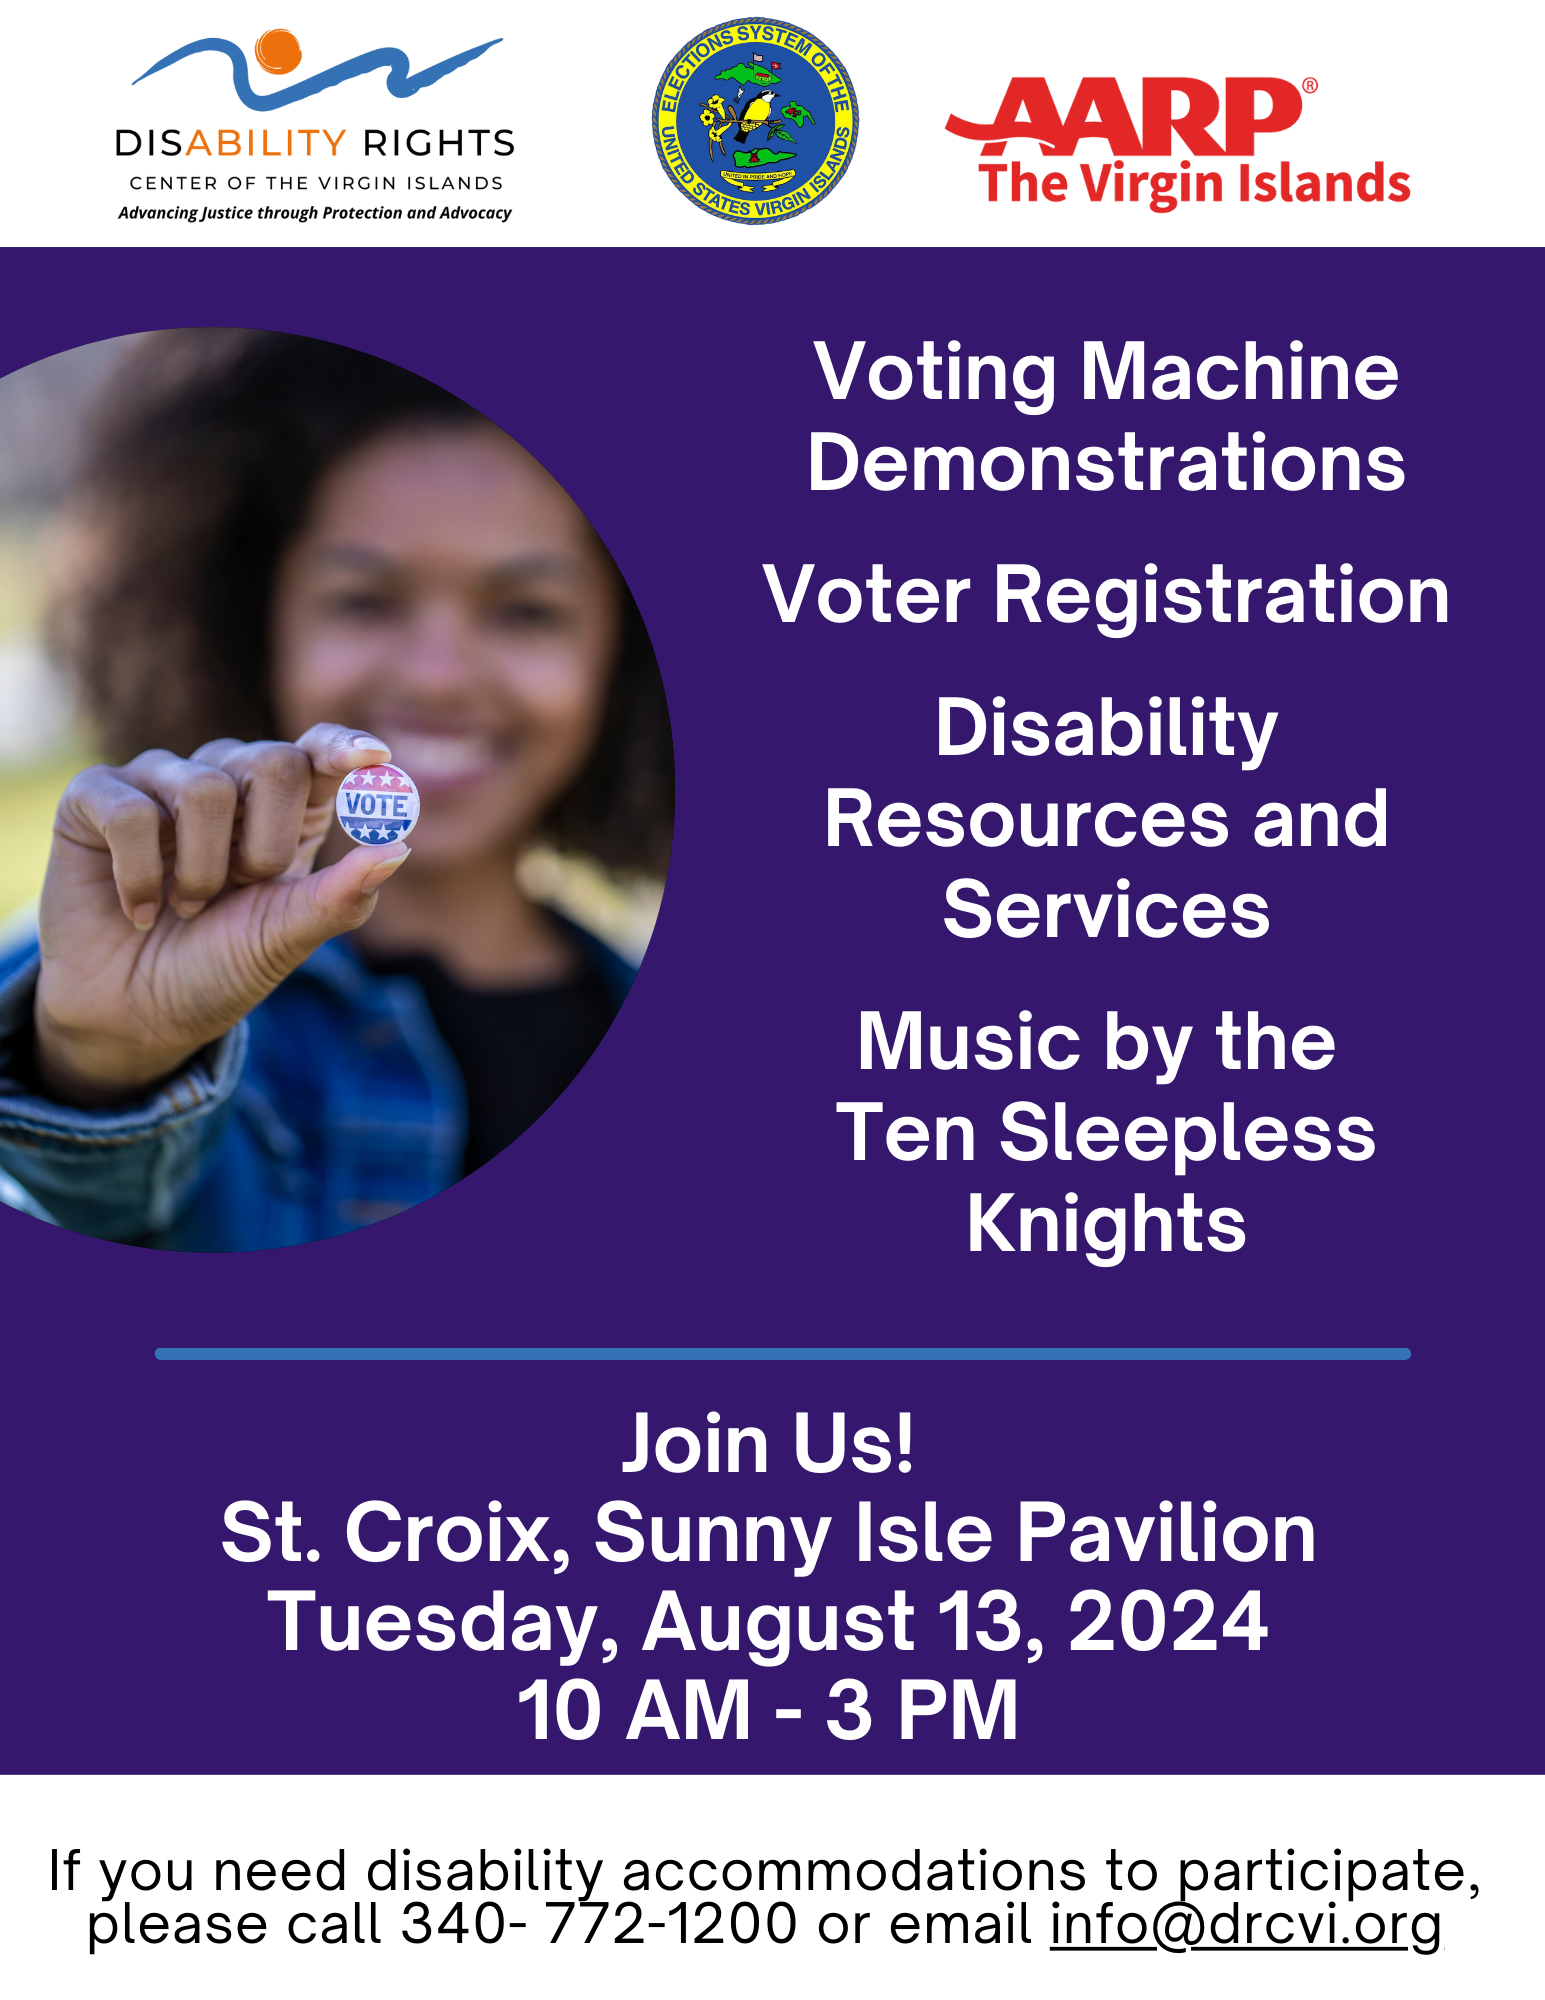 Logos: The Disability Rights Center of the Virgin Islands, The VI Board of Elections, AARP of the Virgin Islands. Photo: Person holding a “VOTE” campaign button. Voting Machine Demonstrations. Voter Registration. Disability Resources and Services. Music by the Ten Sleepless Knights. Join Us! St. Croix, Sunny Isle Pavilion. Tuesday, August 13, 2024. 10 AM - 3 PM. If you need disability accommodations to participate, please call 340- 772-1200 or email info@drcvi.org